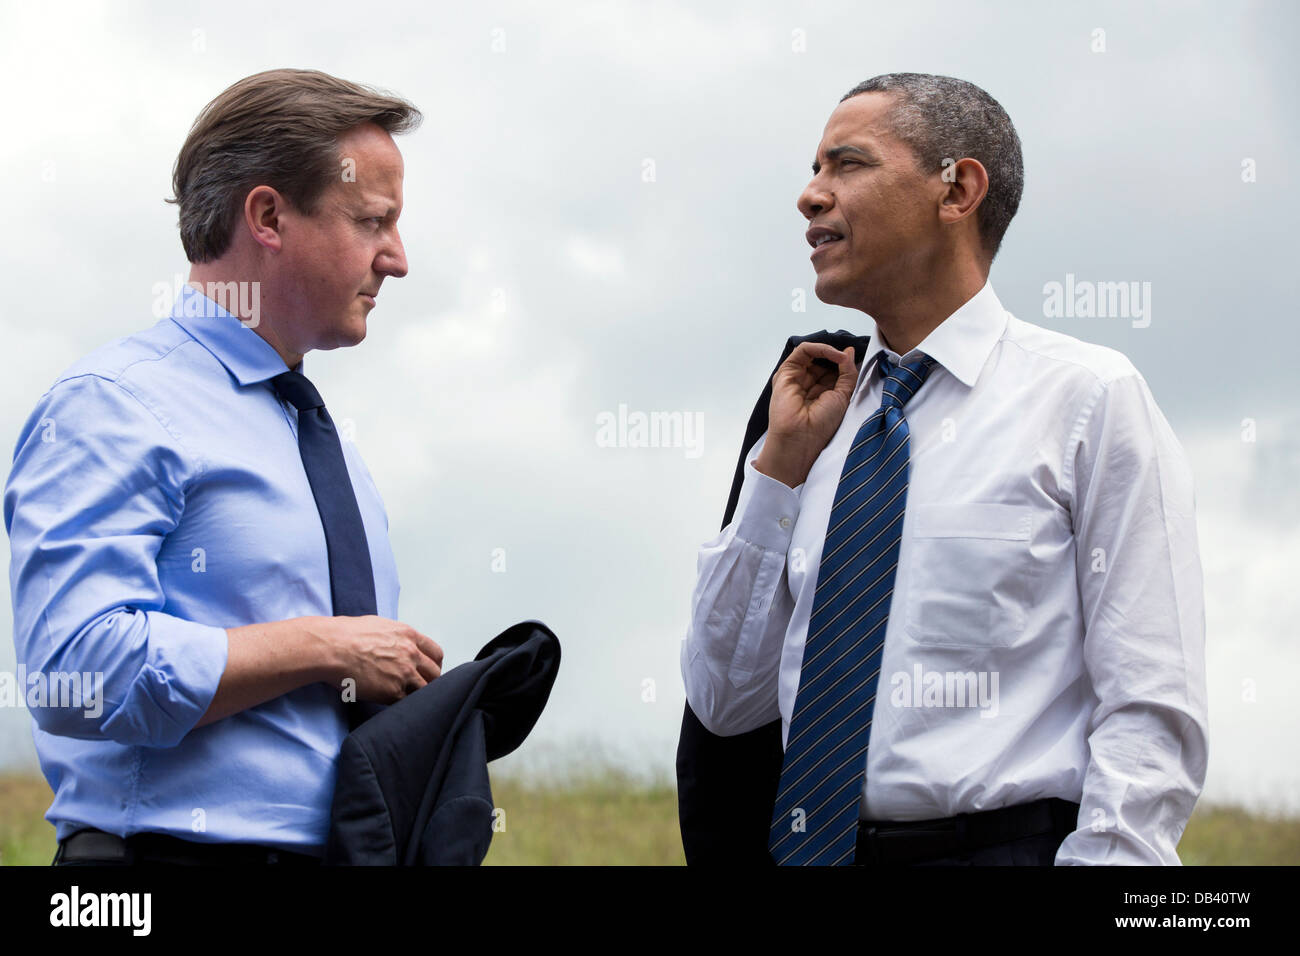 President Barack Obama and Prime Minister David Cameron of the United Kingdom talk during the G8 Summit at the Lough Erne Resort in Enniskillen, Northern Ireland, June 17, 2013. Stock Photo